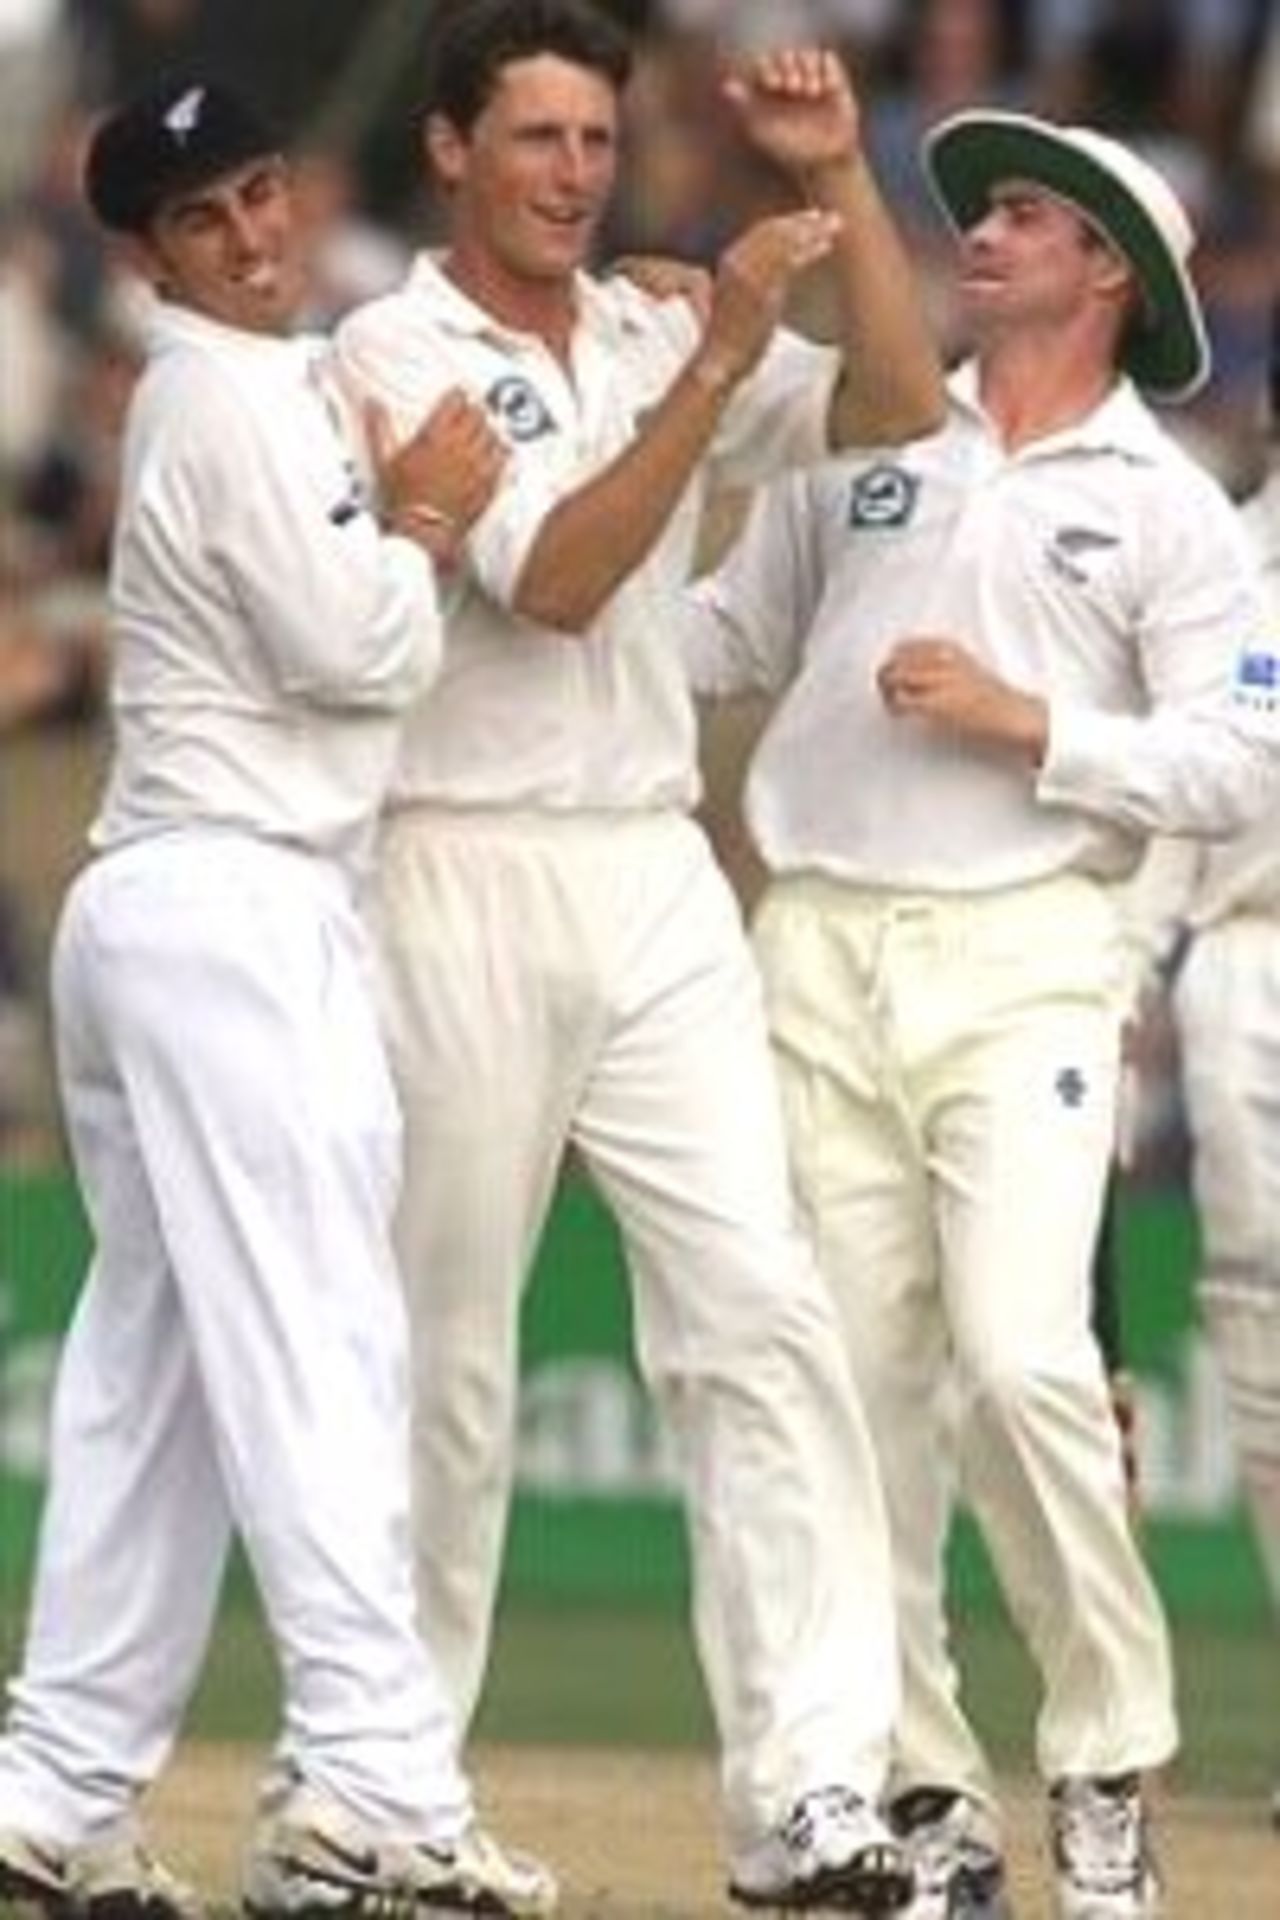 02 Apr 2000: Shayne O'Connor of New Zealand celebrates after trapping Michael Slater of Australia LBW, during day three of the third test between New Zealand and Australia, at WestpacTrust Park, Hamilton, New Zealand.